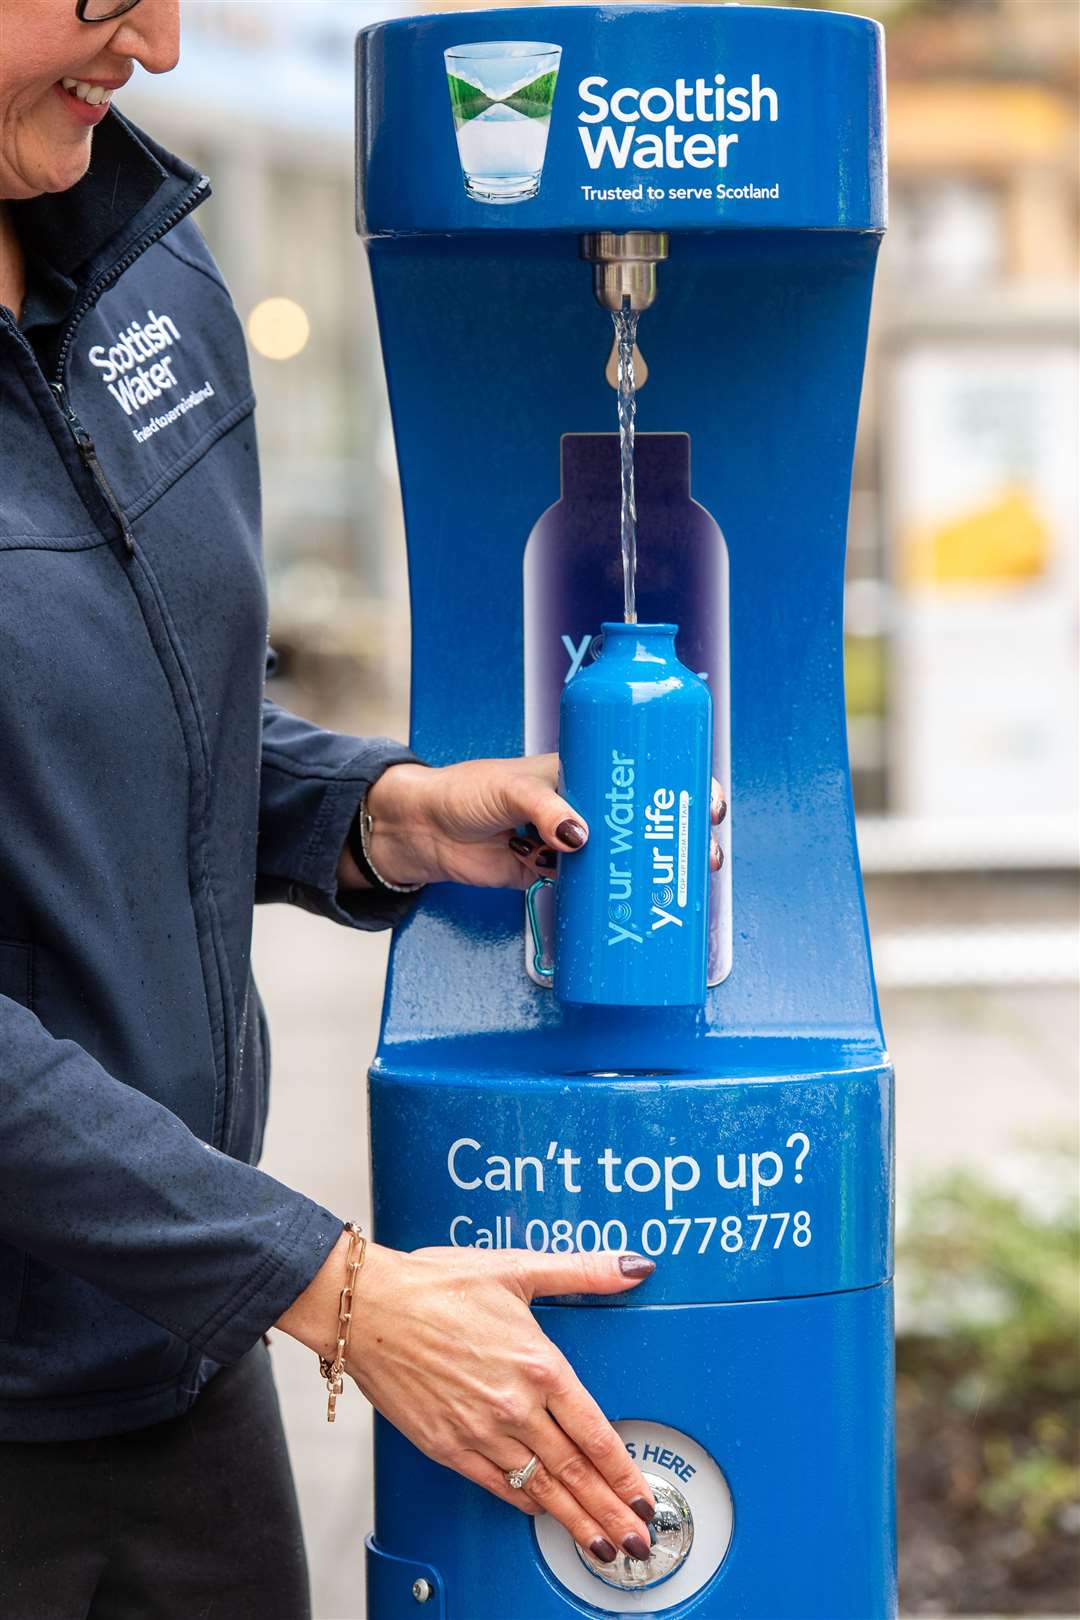 A water bottle refill station, similar to this one, could be erected in the heart of Fort Augustus as part of Scottish Water's Top Up Taps scheme – which seeks to encourage people to save plastic by refilling bottles instead of buying new bottled water.